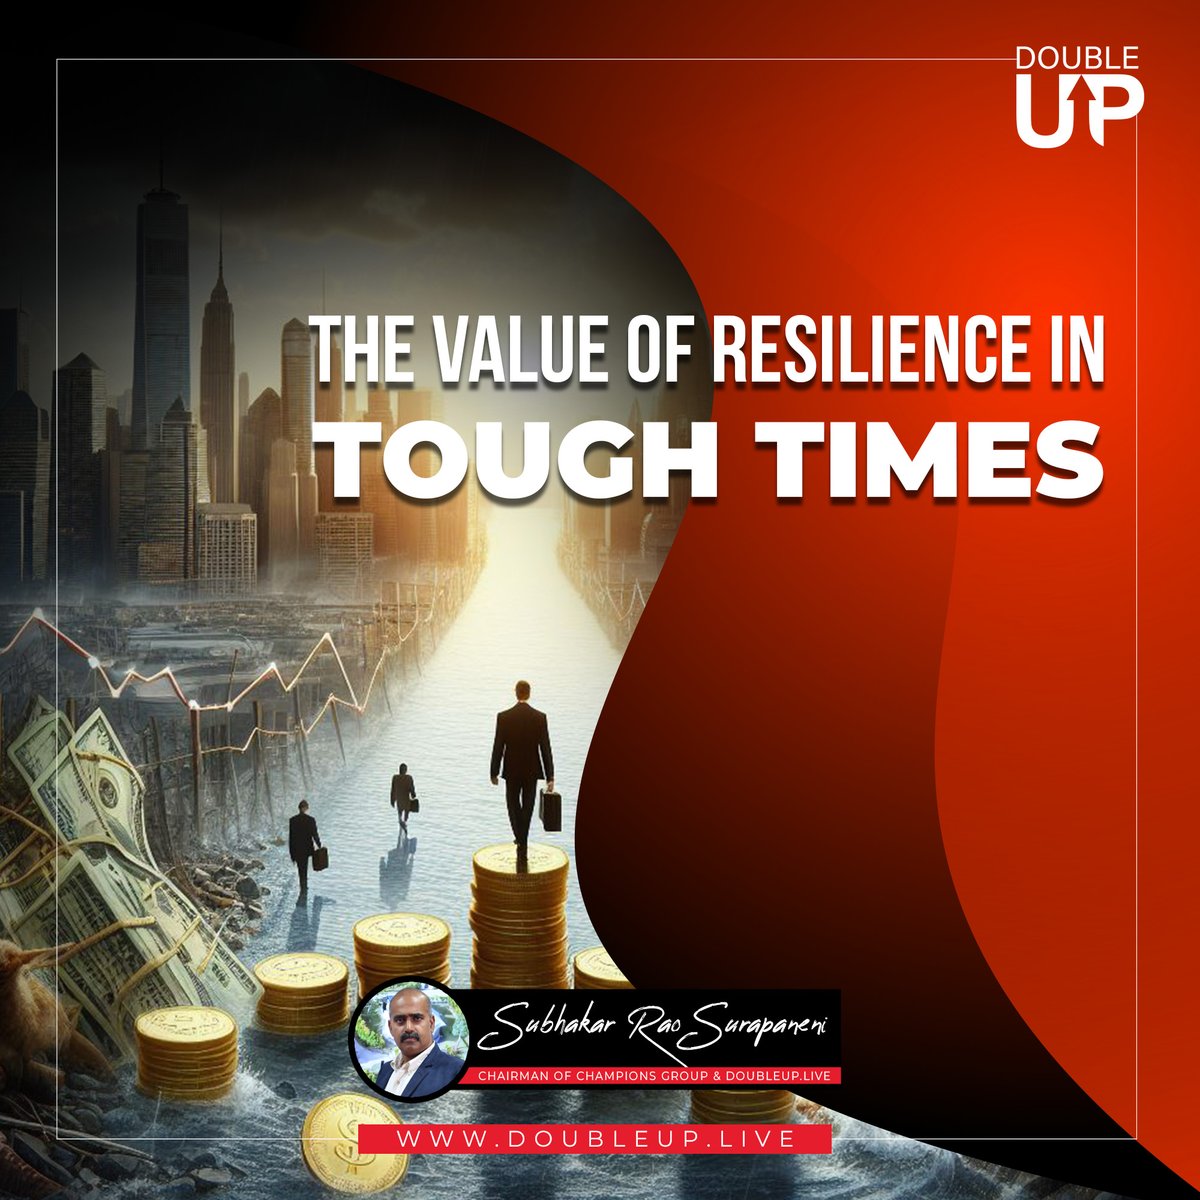 #Resilience is the ability to #bounceback from #adversity. Face challenges with #strength, learn from #hardships and use them as stepping stones towards greater resilience and #innerstrength. #ToughTimes #Challenges #Growth #Perseverance #StayStrong #DoubleUp #SubhakarRao